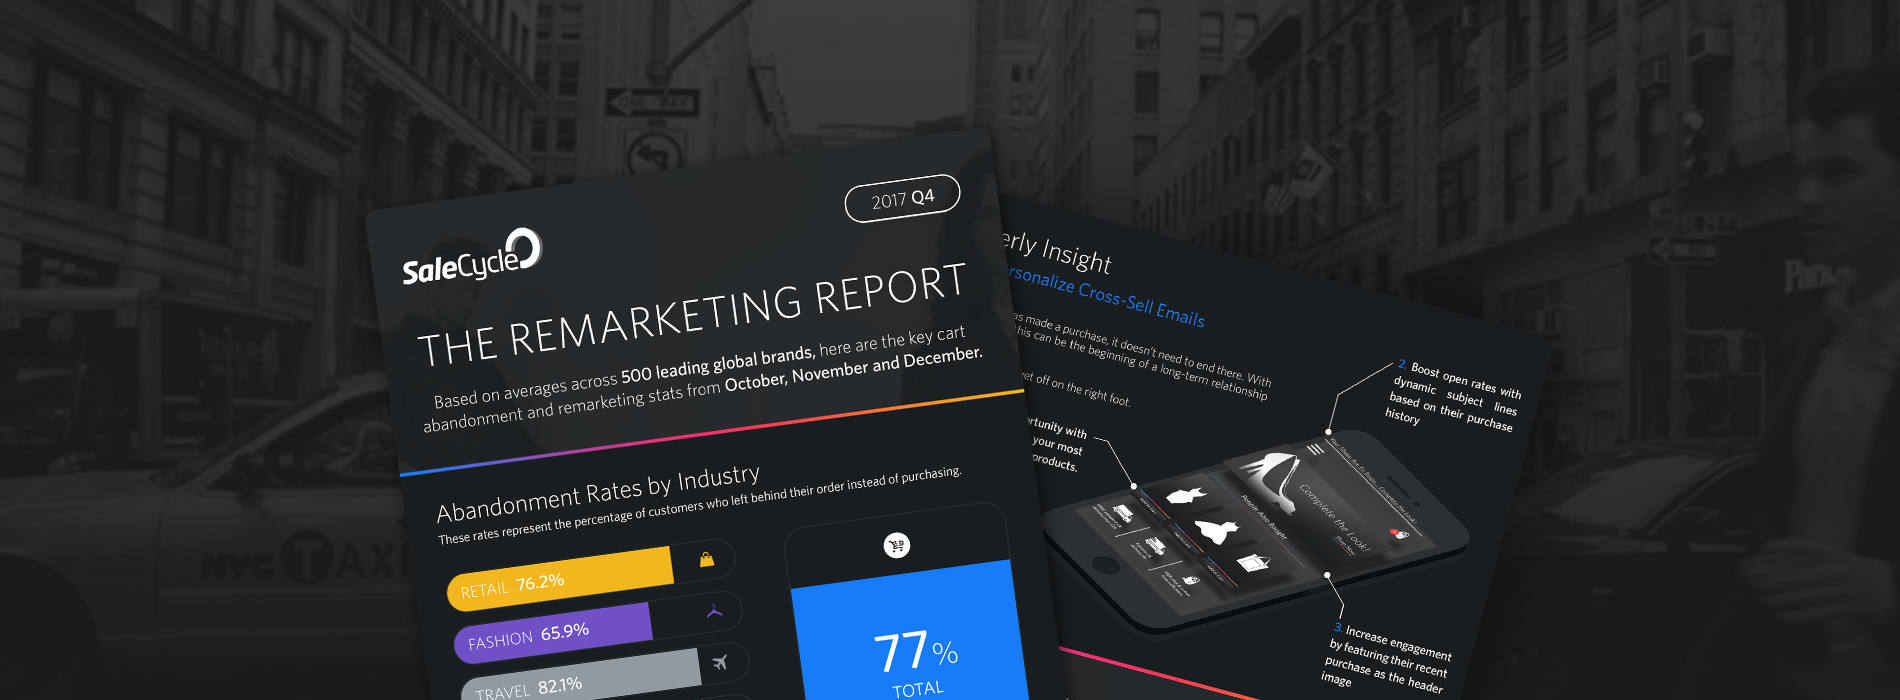 [Infographic] The Remarketing Report – Q4 2017